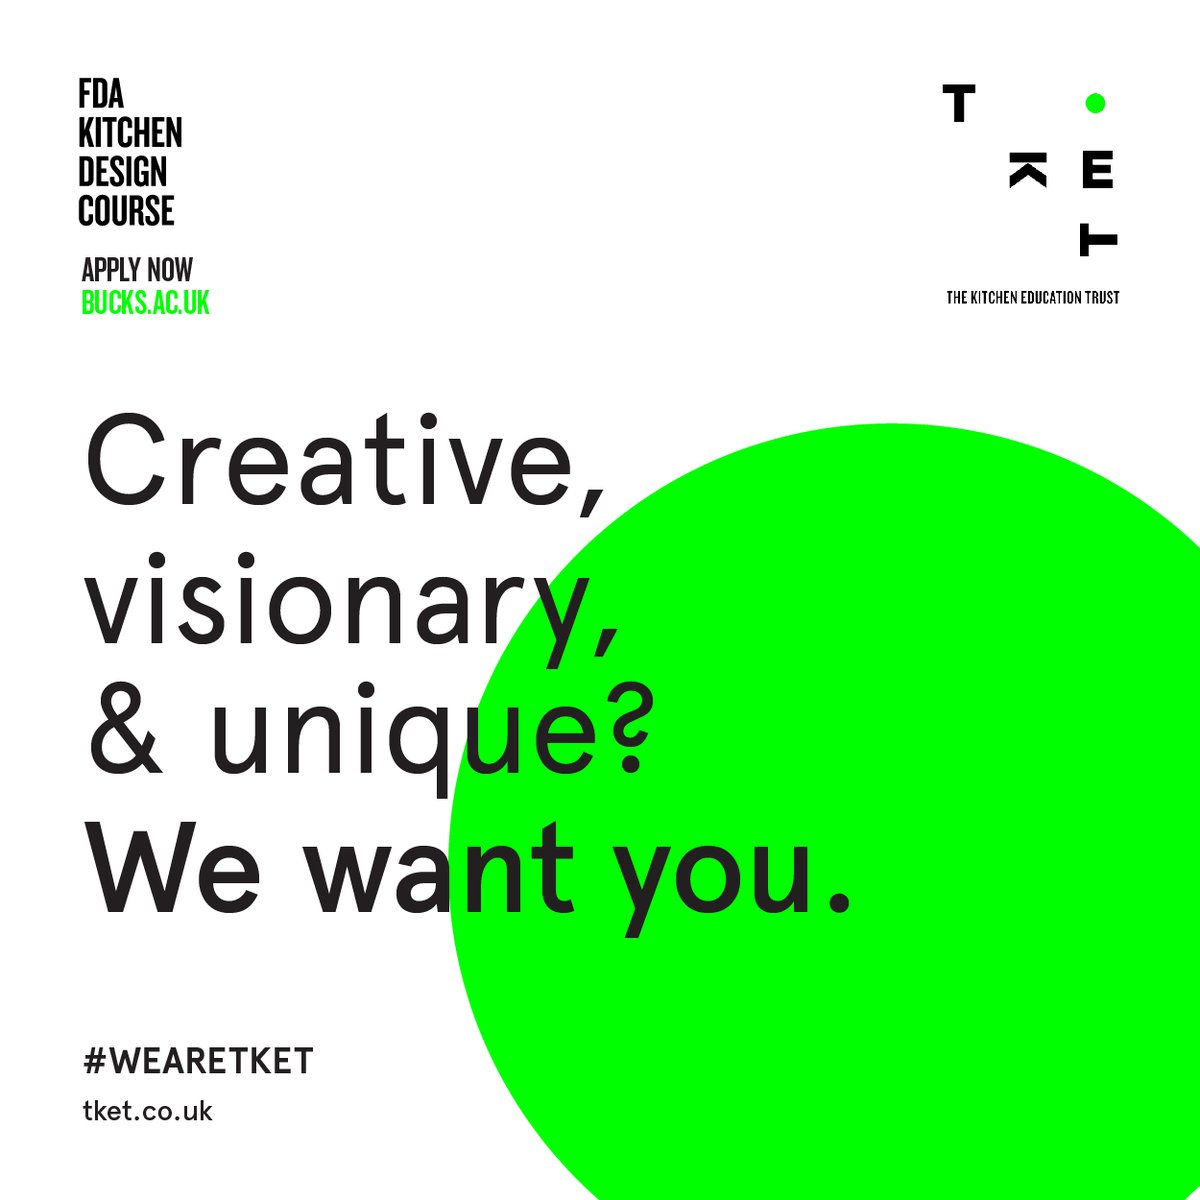 Creative, visionary & unique? We want you... find out why at tket.co.uk #weareTKET